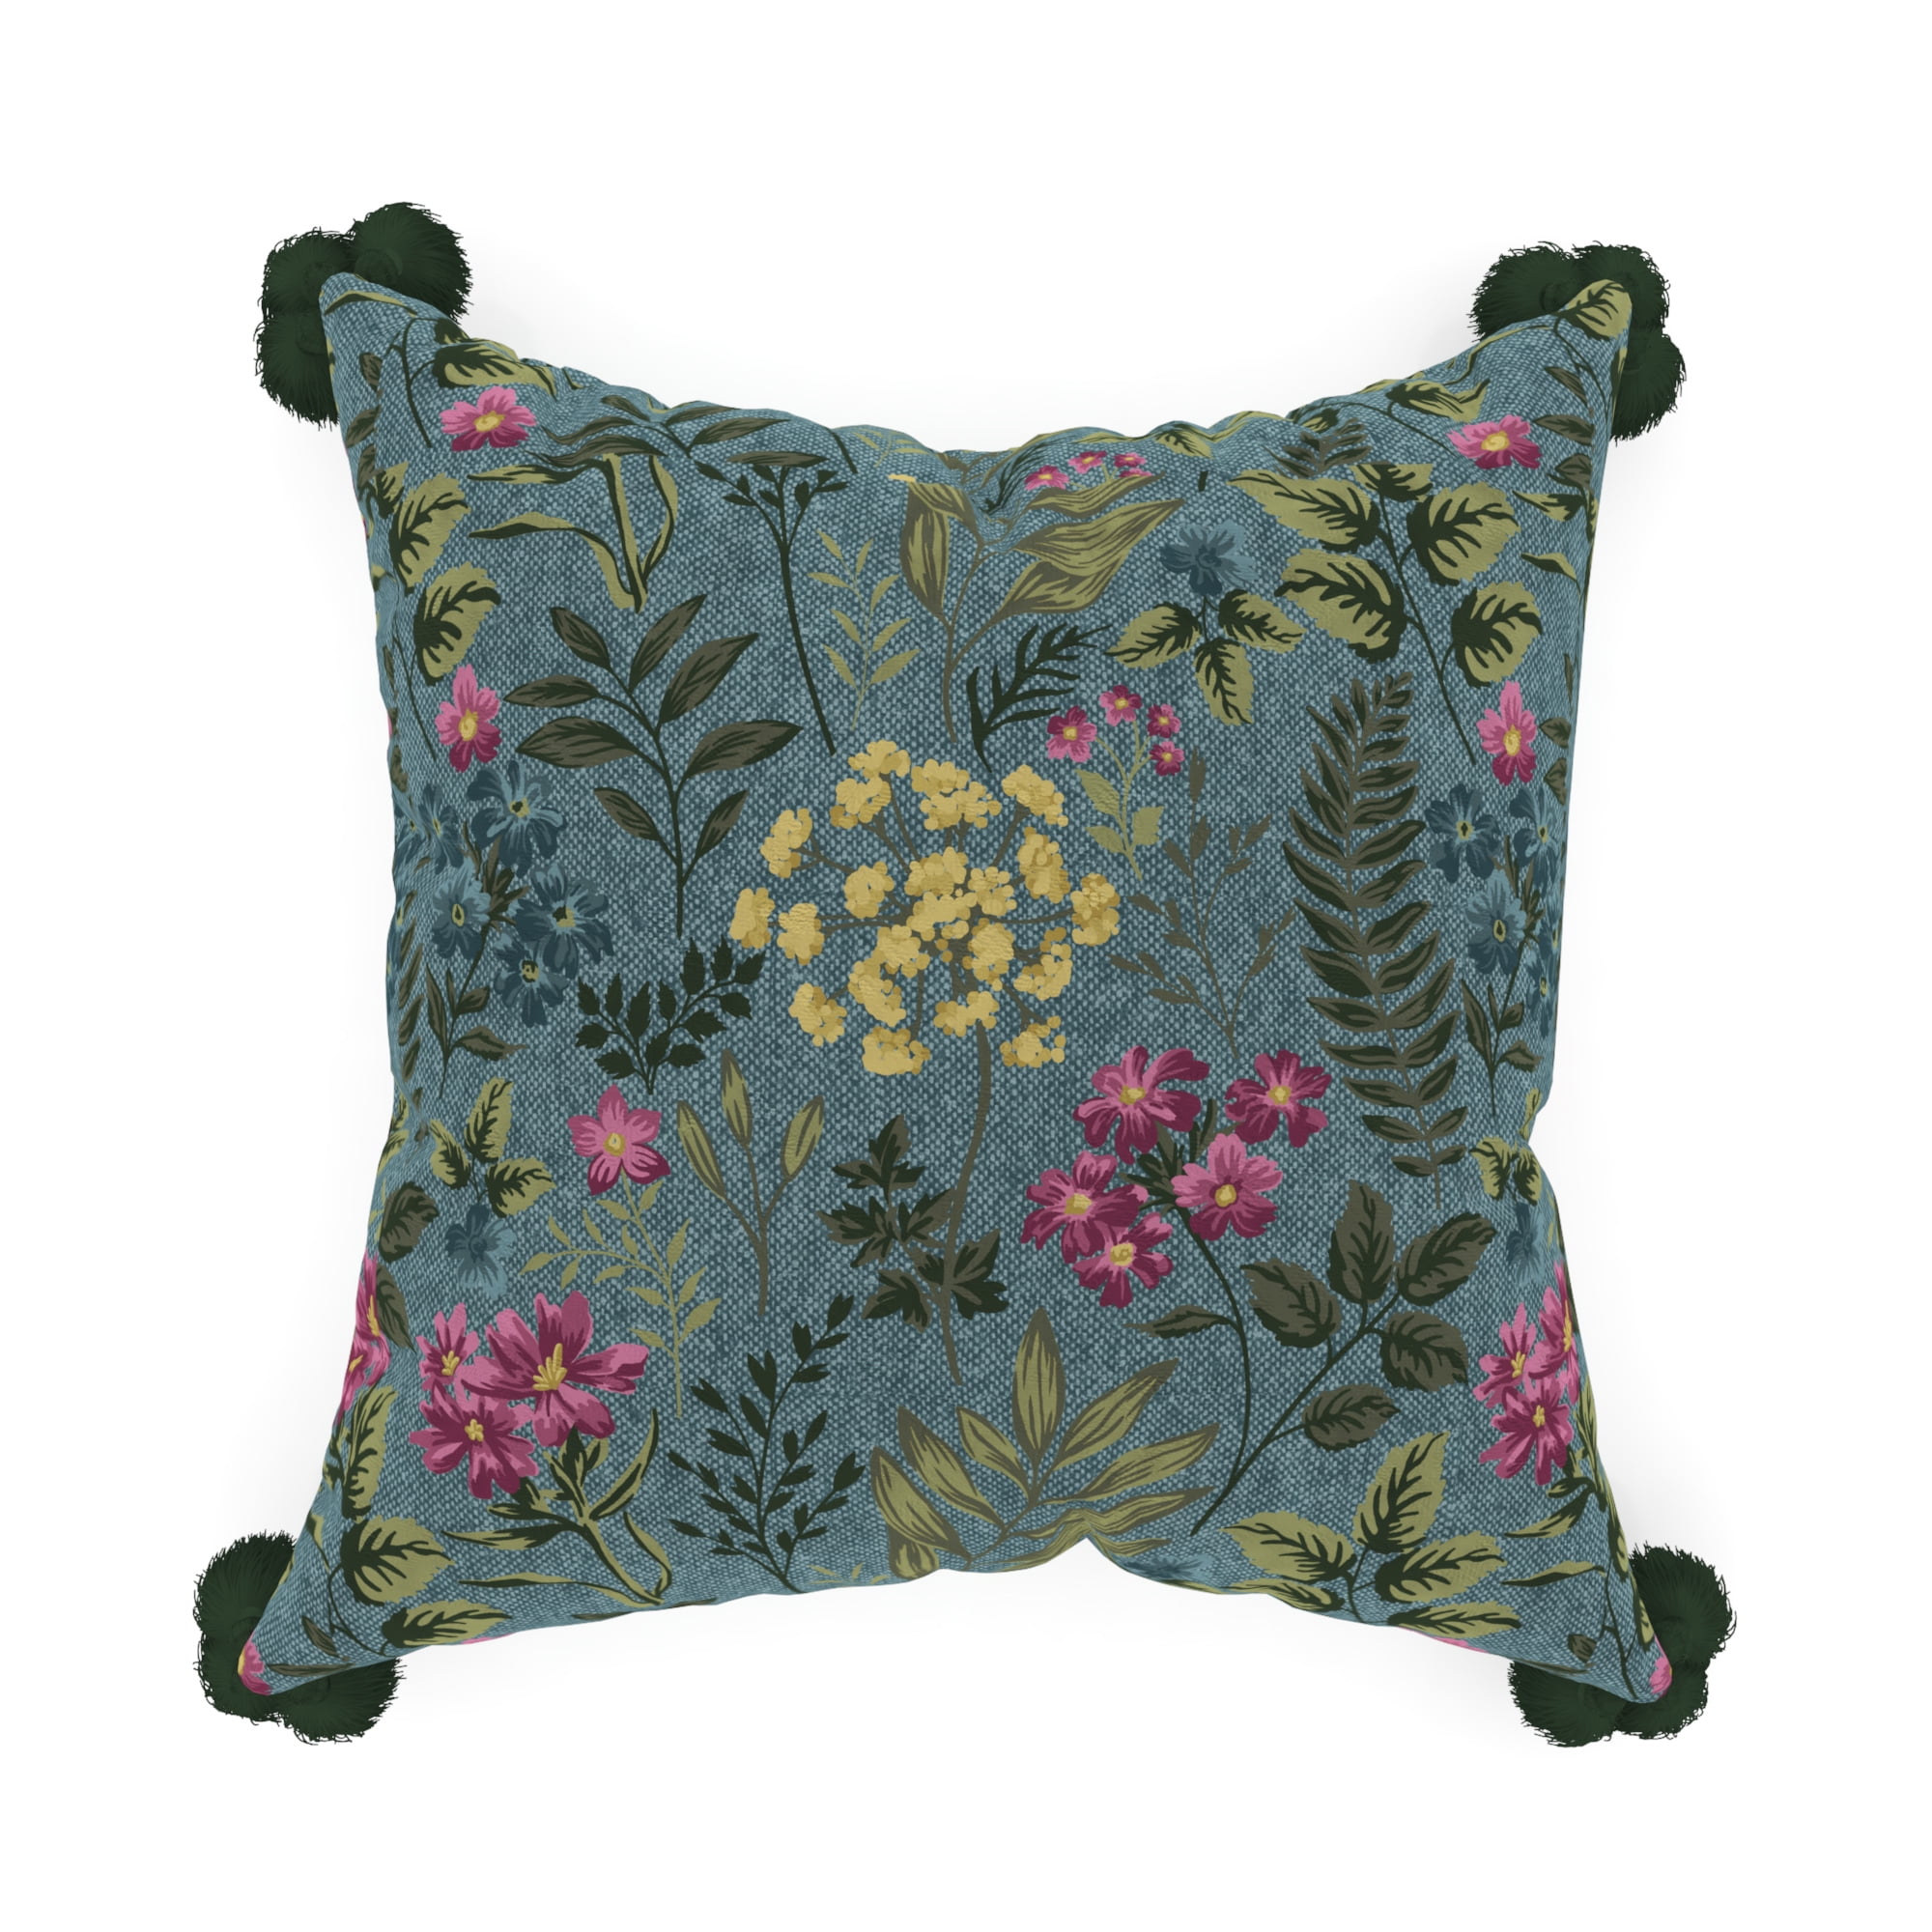 Tropical Cushion Covers Hanging Garden Floral Cushions Cover 20" x 20" Paoletti